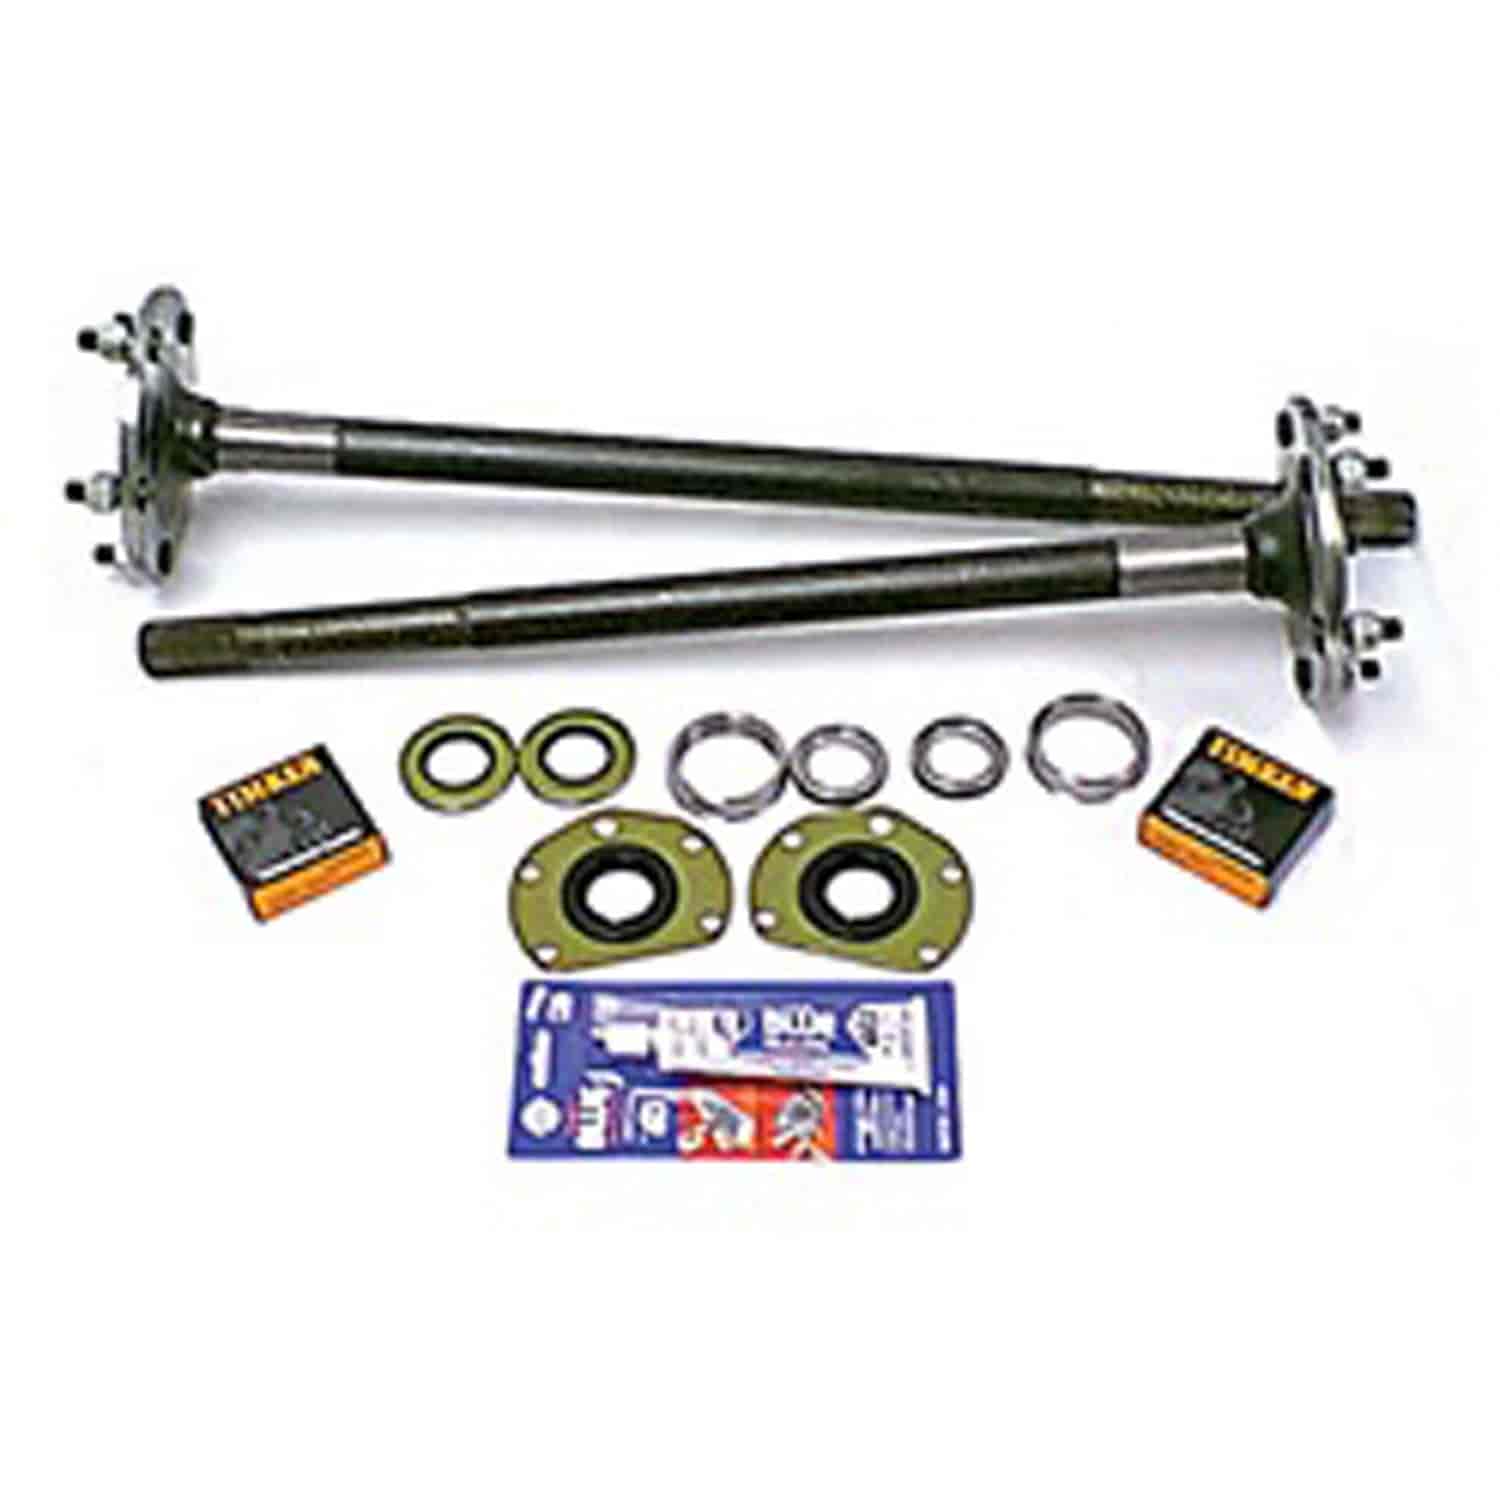 One Piece Axle Conversion Kit AMC20 Wide Track Includes Axles Bearings Retainers Spacers Inner and O